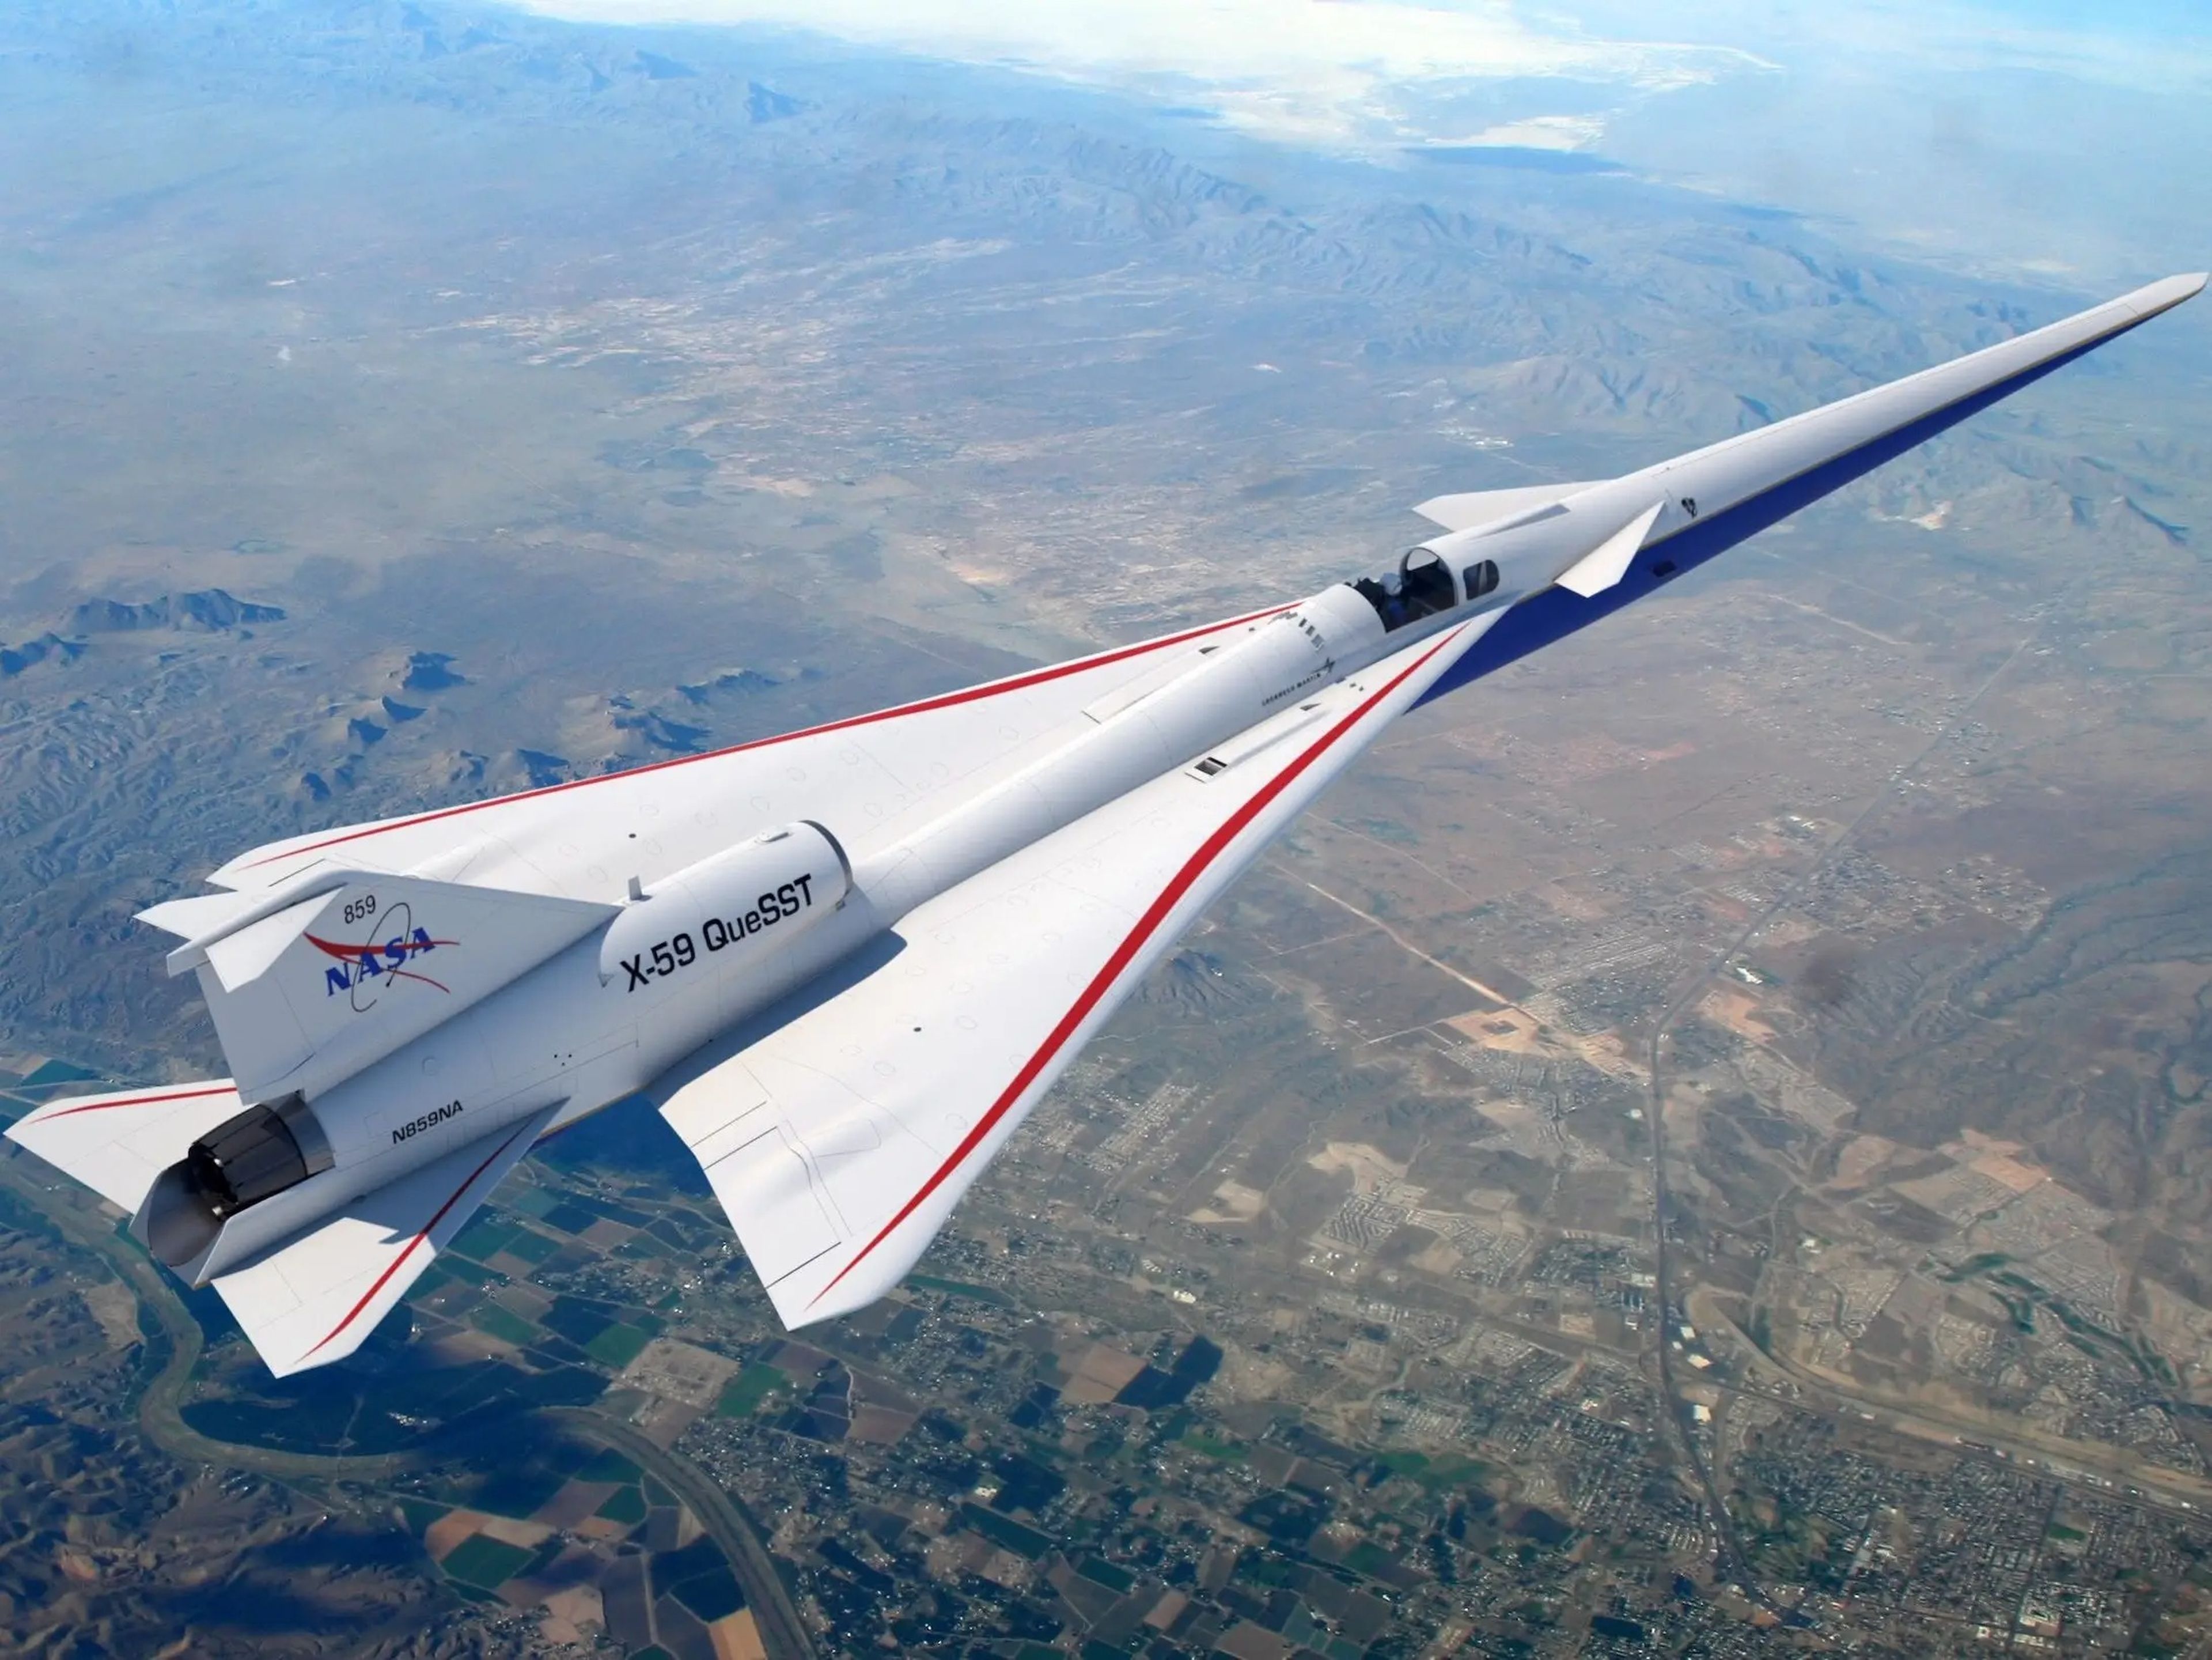 X-59 SuperSonic Technology (QueSST).